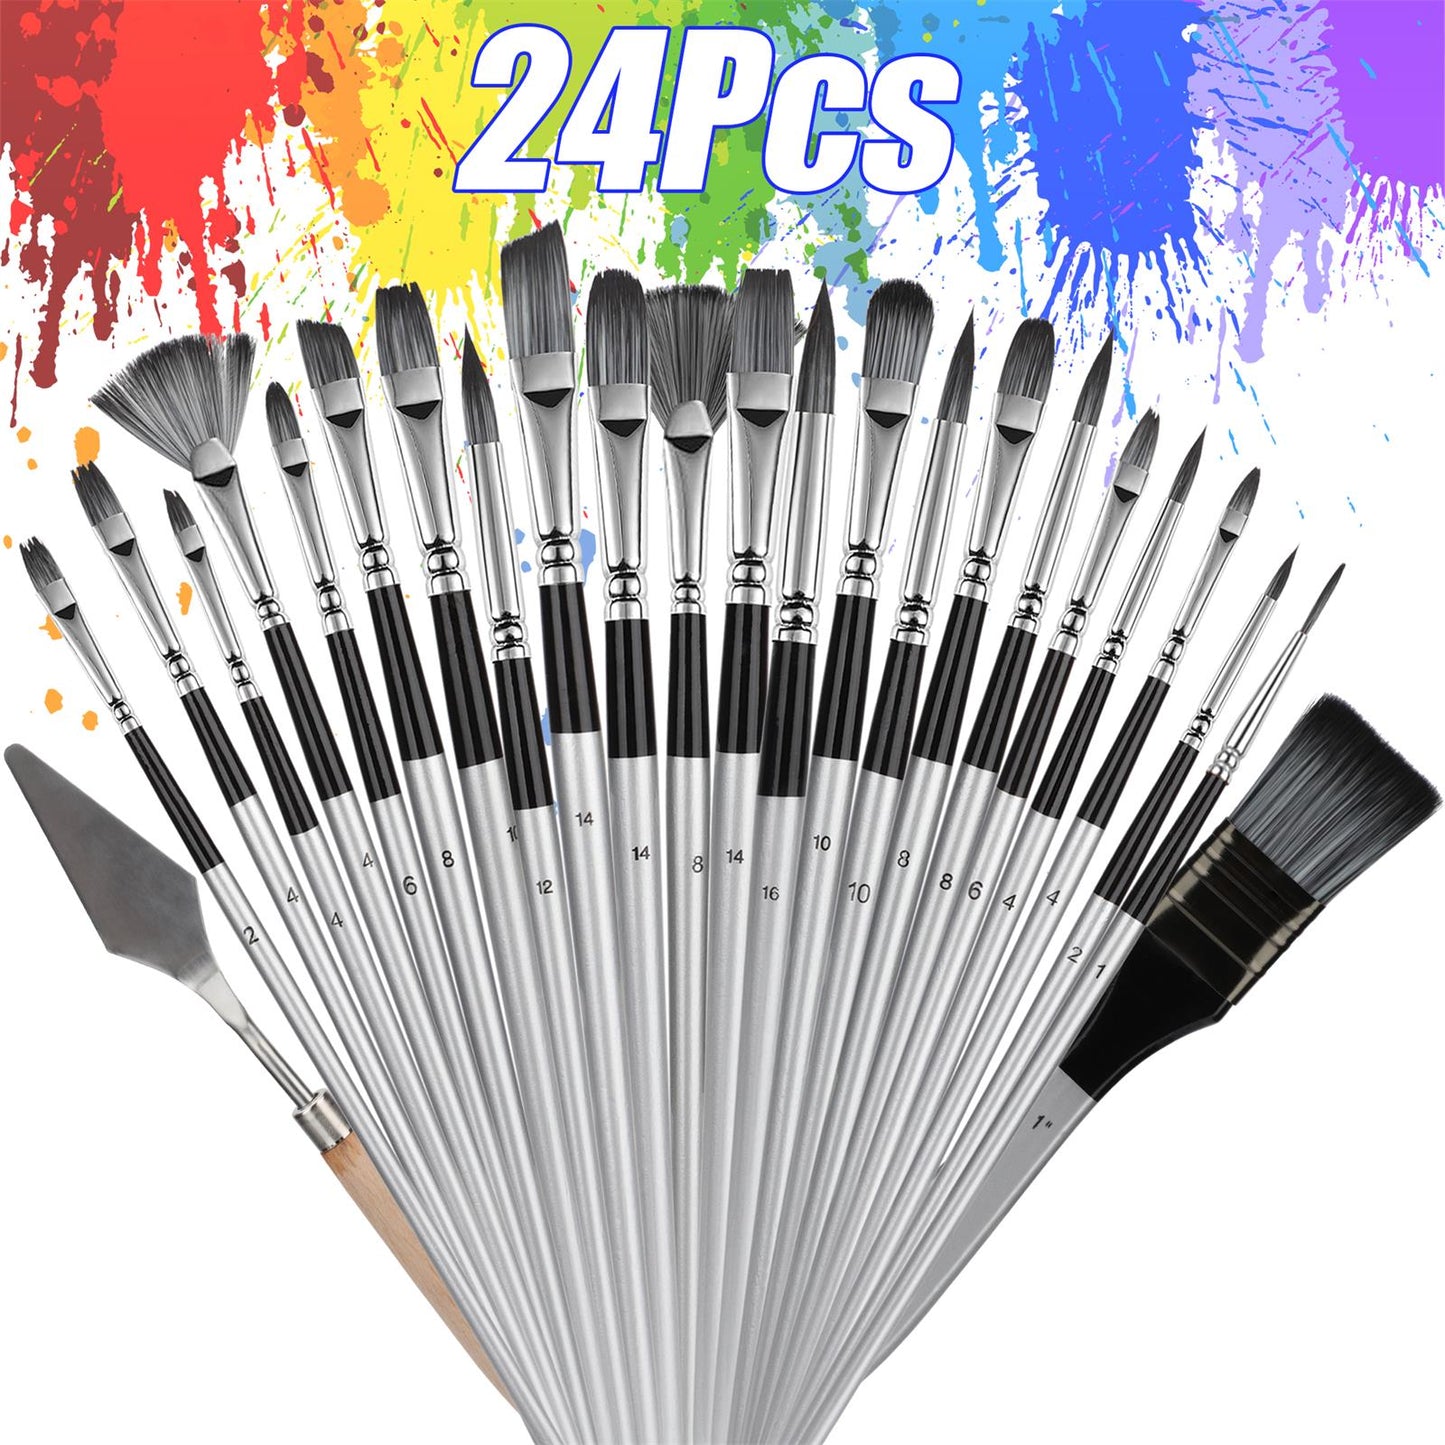 24Pcs Acrylic Paint Brush Set - Wooden Handle Brushes Acrylic Oil Watercolor Painting Brush,Art Paint Brush Set with Cloth Roll and Palette Knife